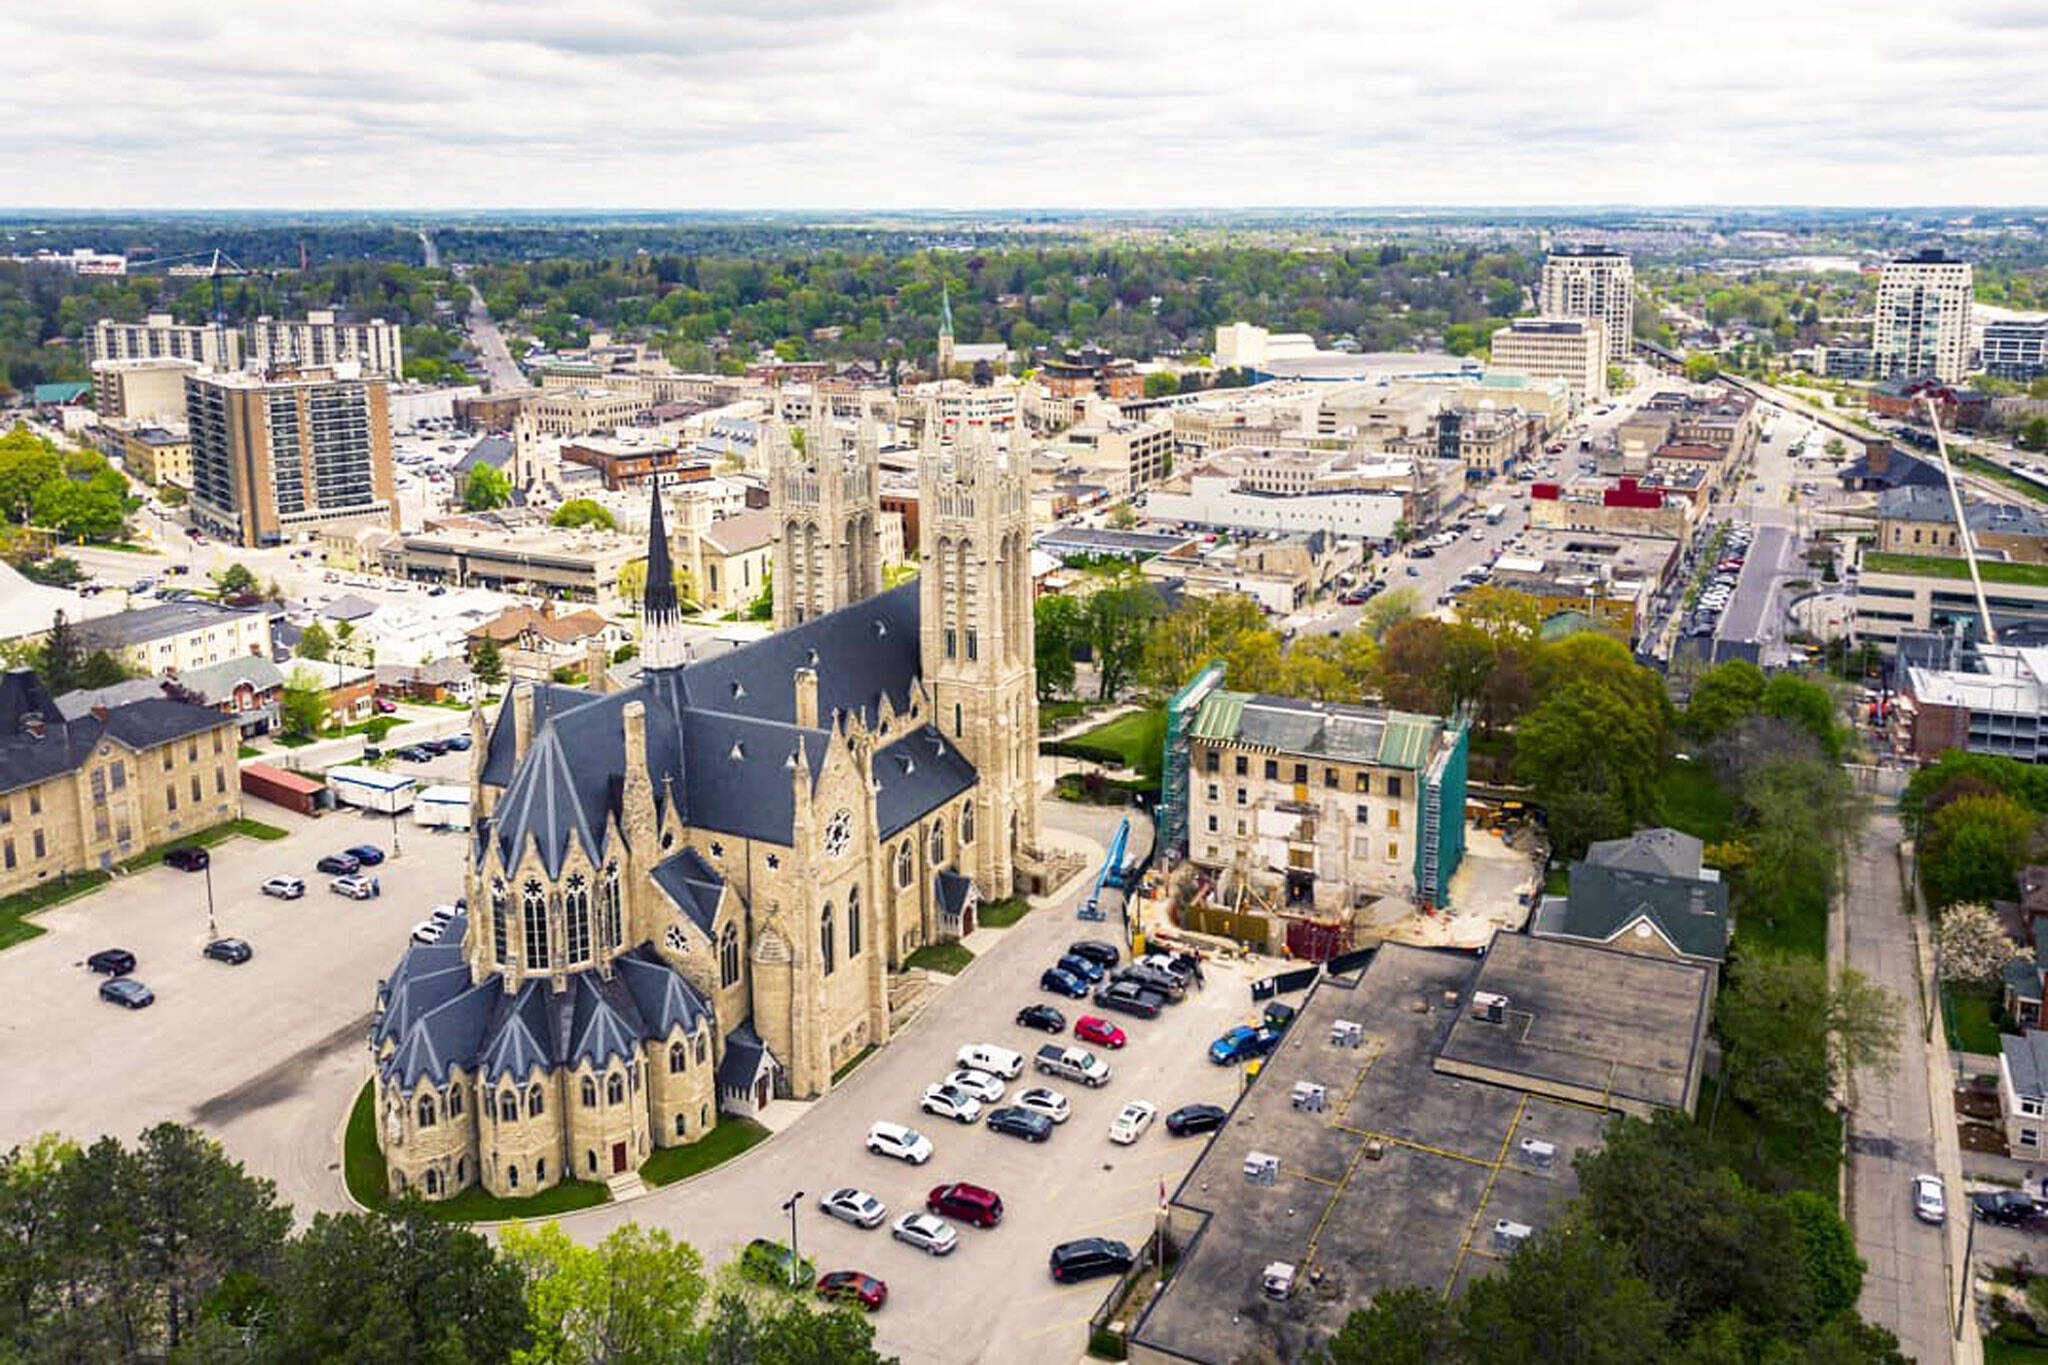 How to spend a day in Guelph